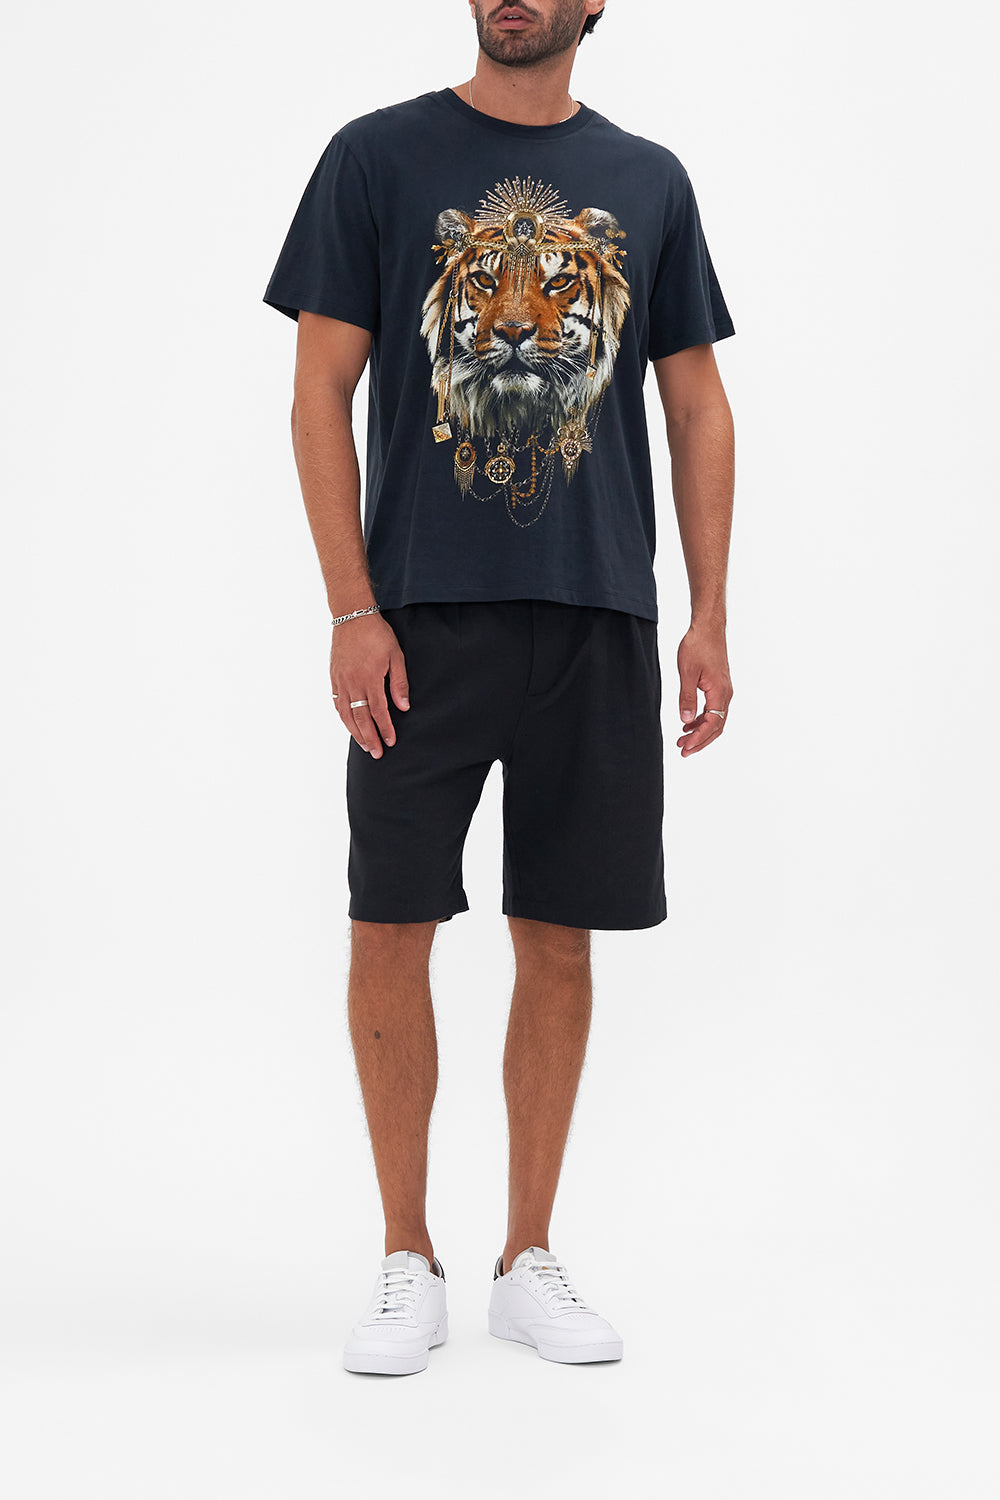 CAMILLA mens black graphic t shirt in The Night Is Noir print